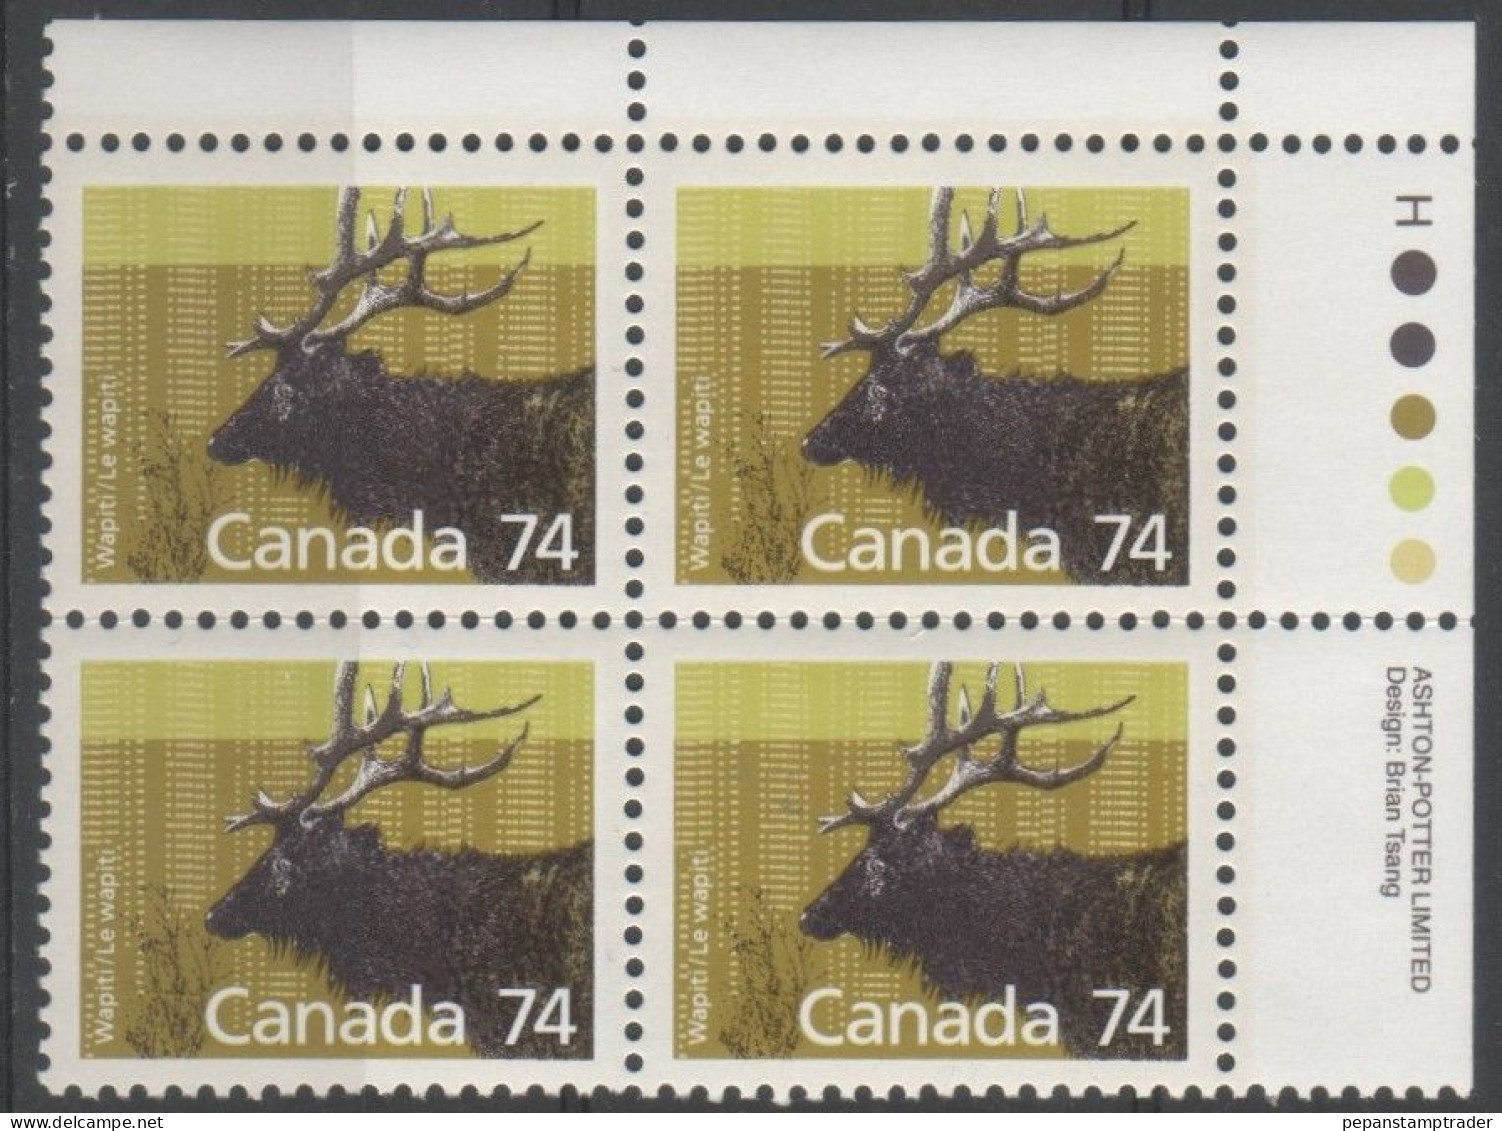 Canada - #1177 - MNH PB Of 4 - Plate Number & Inscriptions